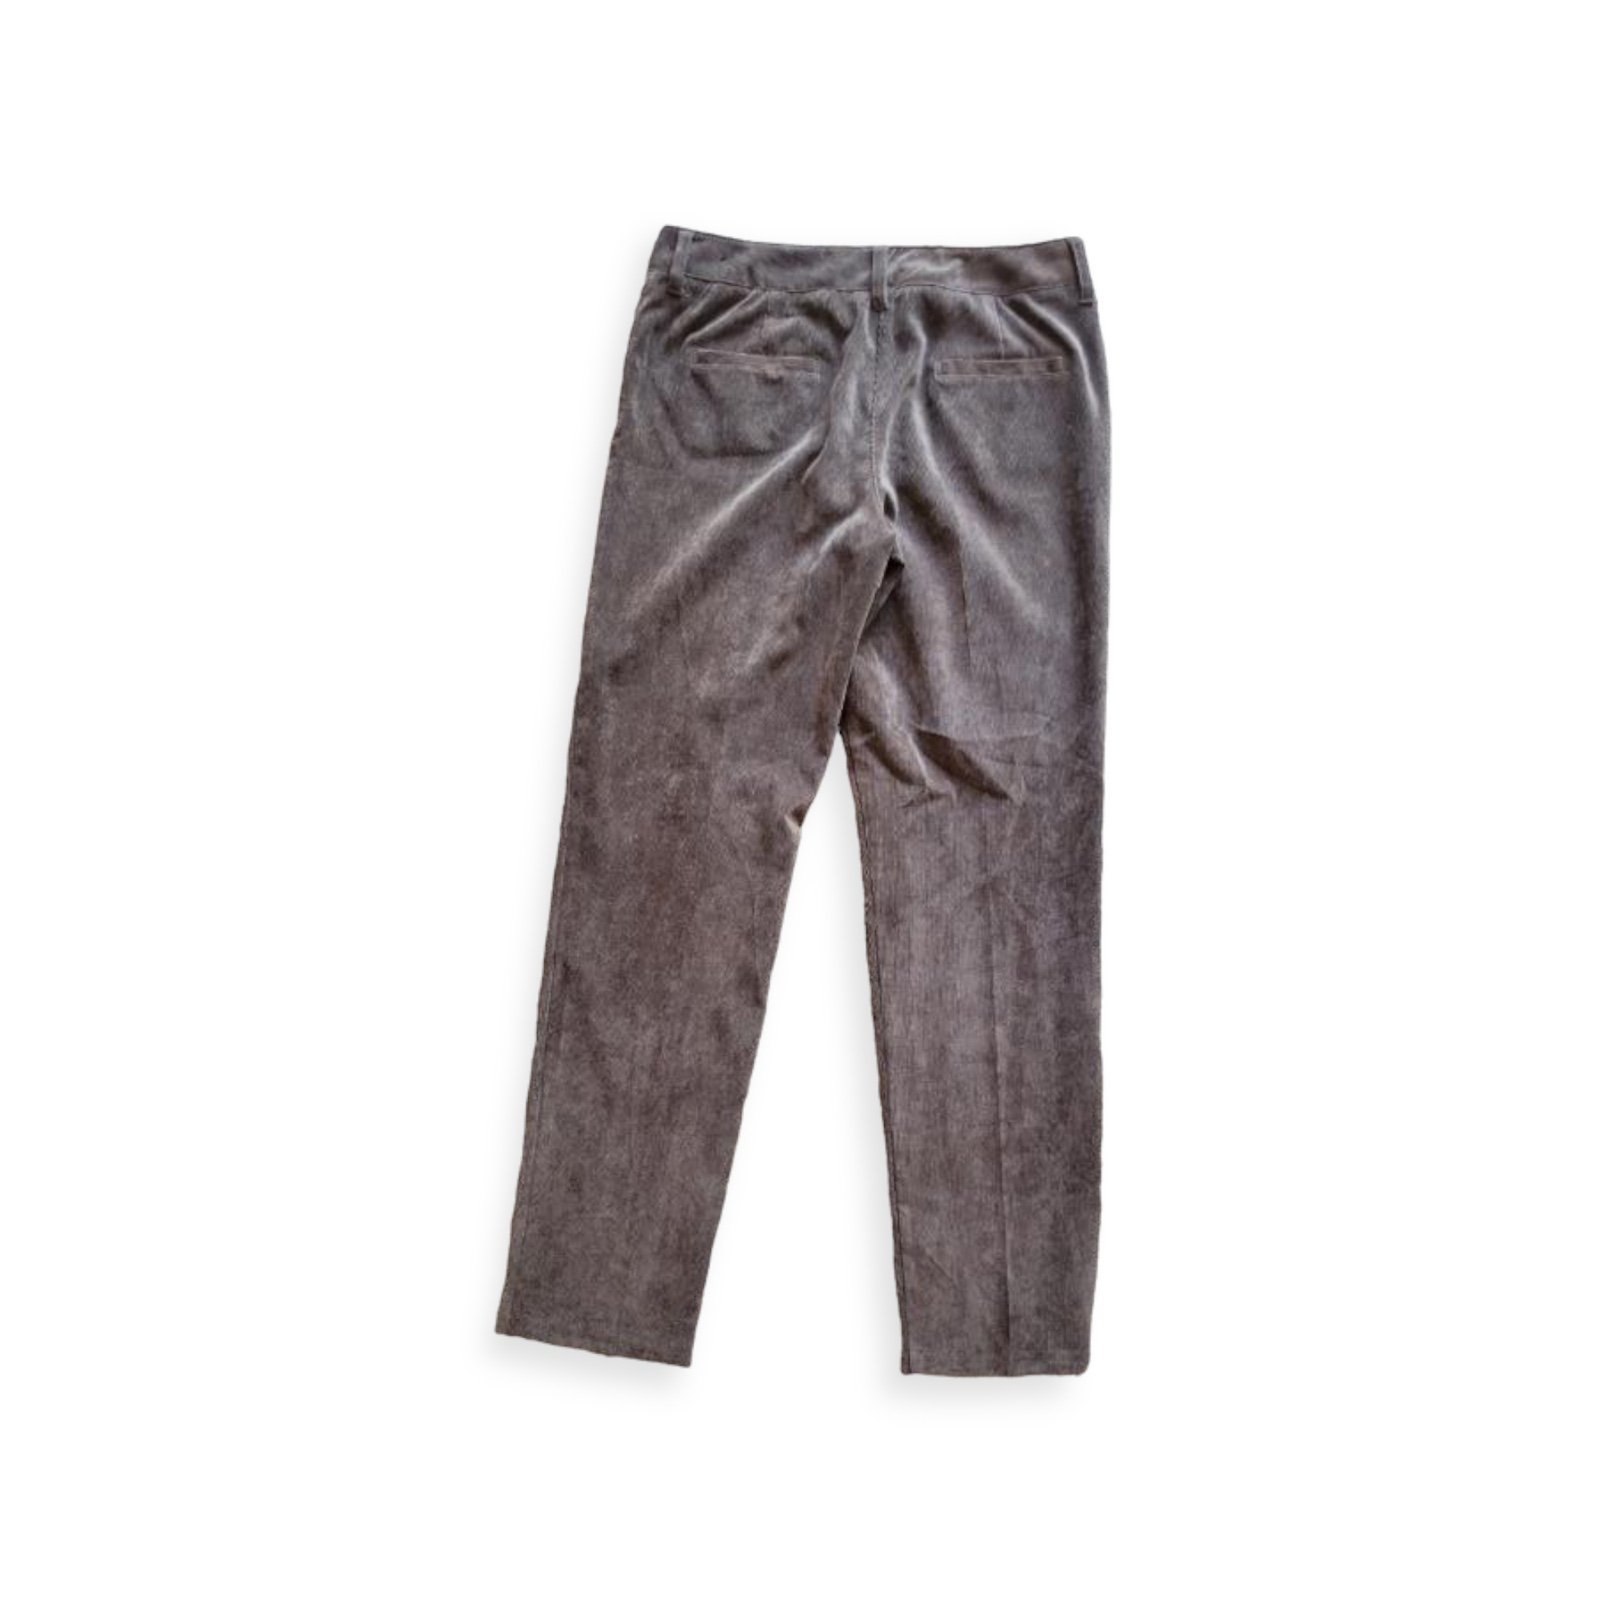 Wholesale price Zac & Rachel brown pants Size 6 small FhMQp9ePt Everyday Low Prices